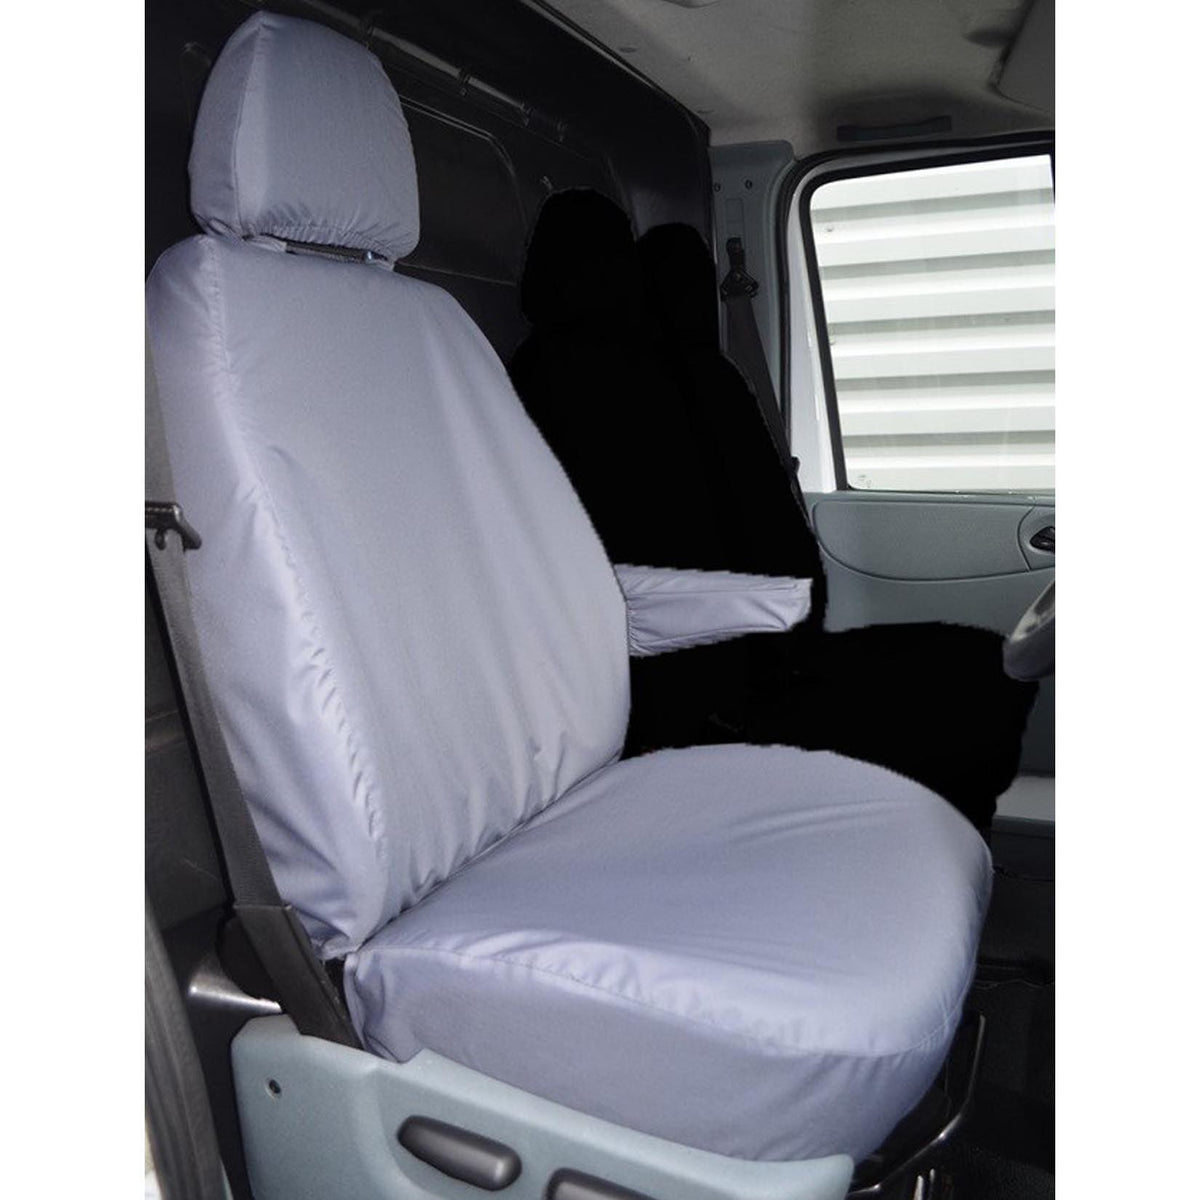 FORD TRANSIT VAN 2000-2013 SINGLE DRIVER SEAT COVER – GREY - Storm Xccessories2